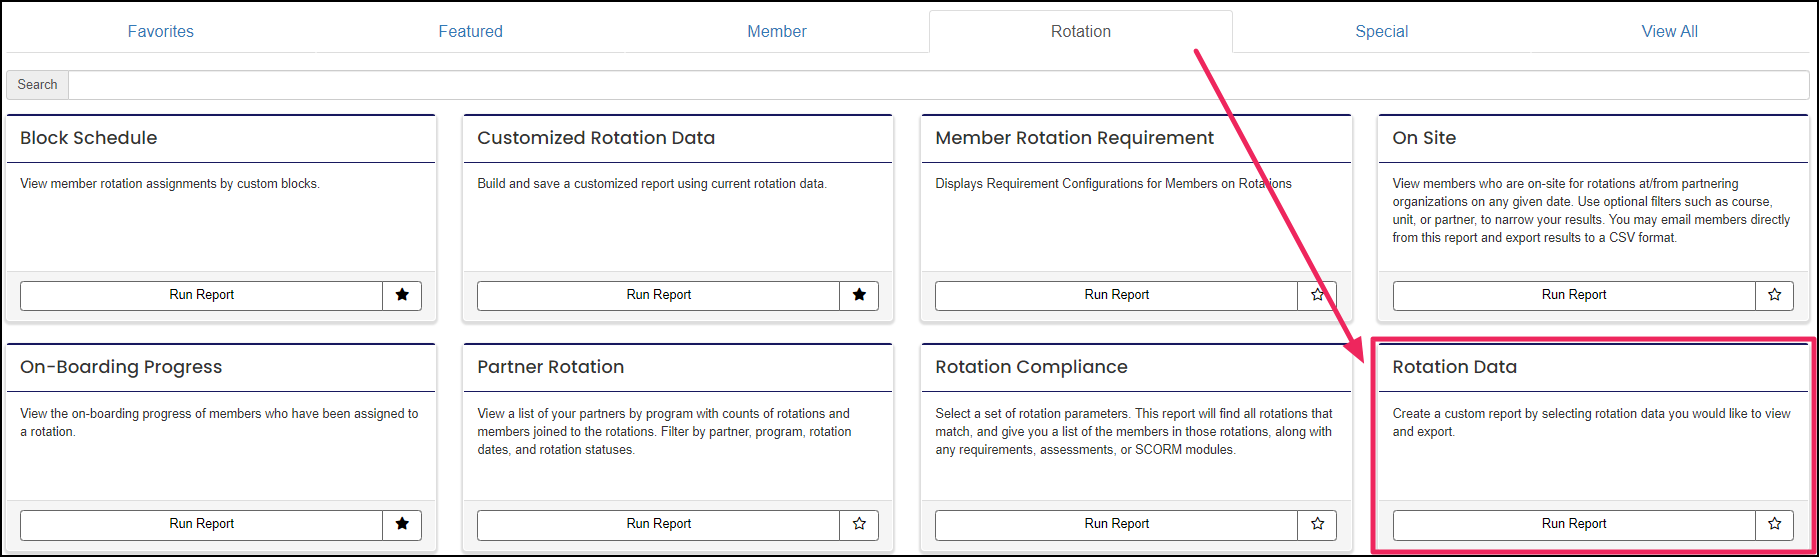 Image shows rotation data report tile in reporting dashboard.